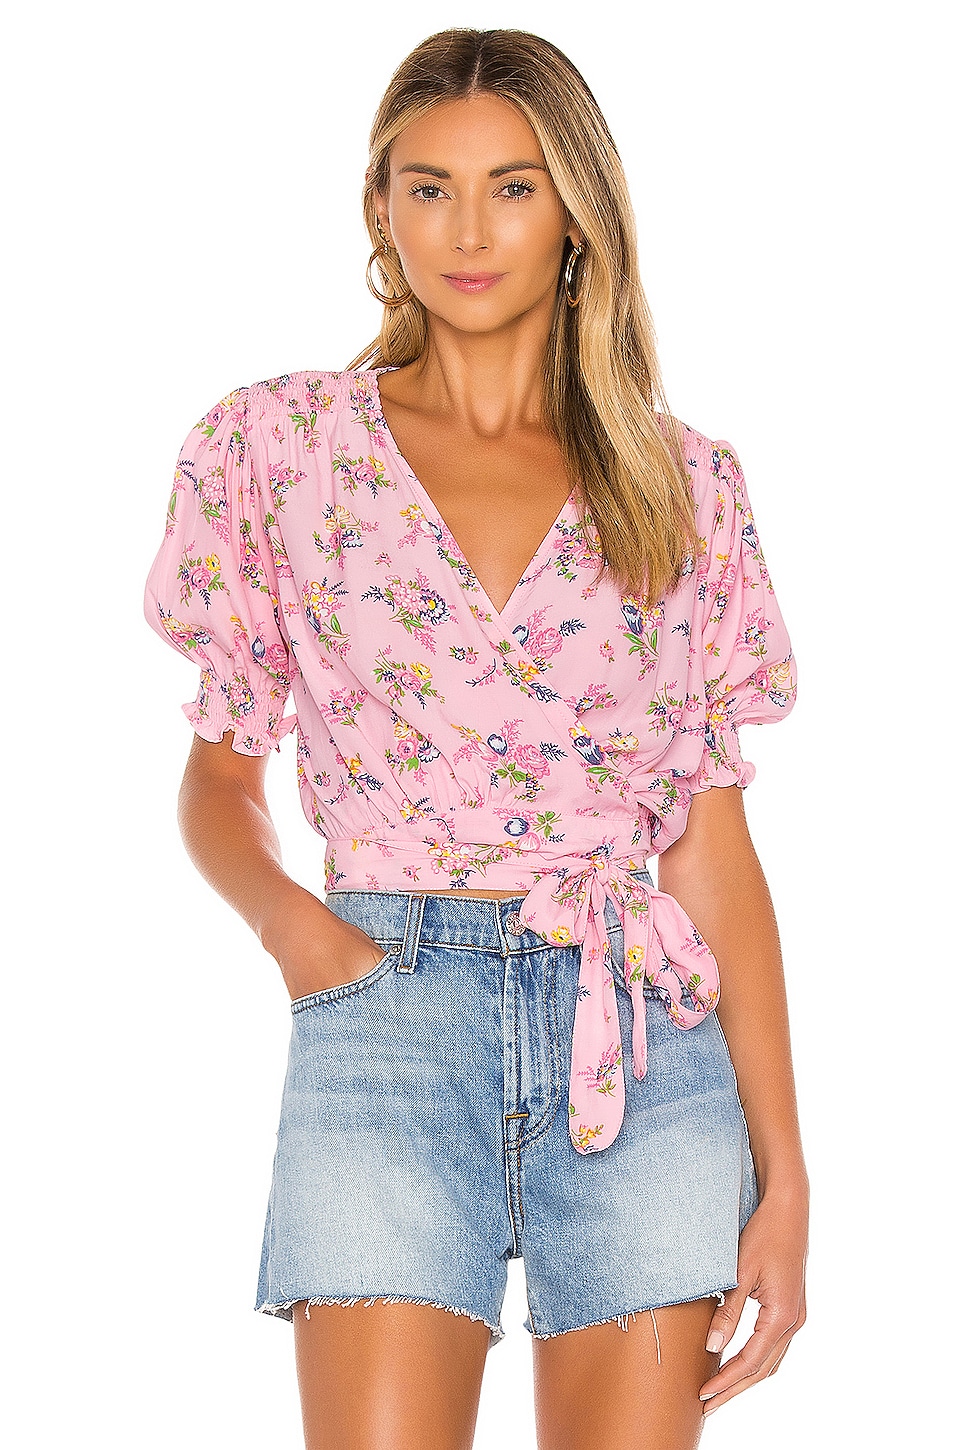 FAITHFULL THE BRAND La Colle Top in Pink Juliette Floral | REVOLVE